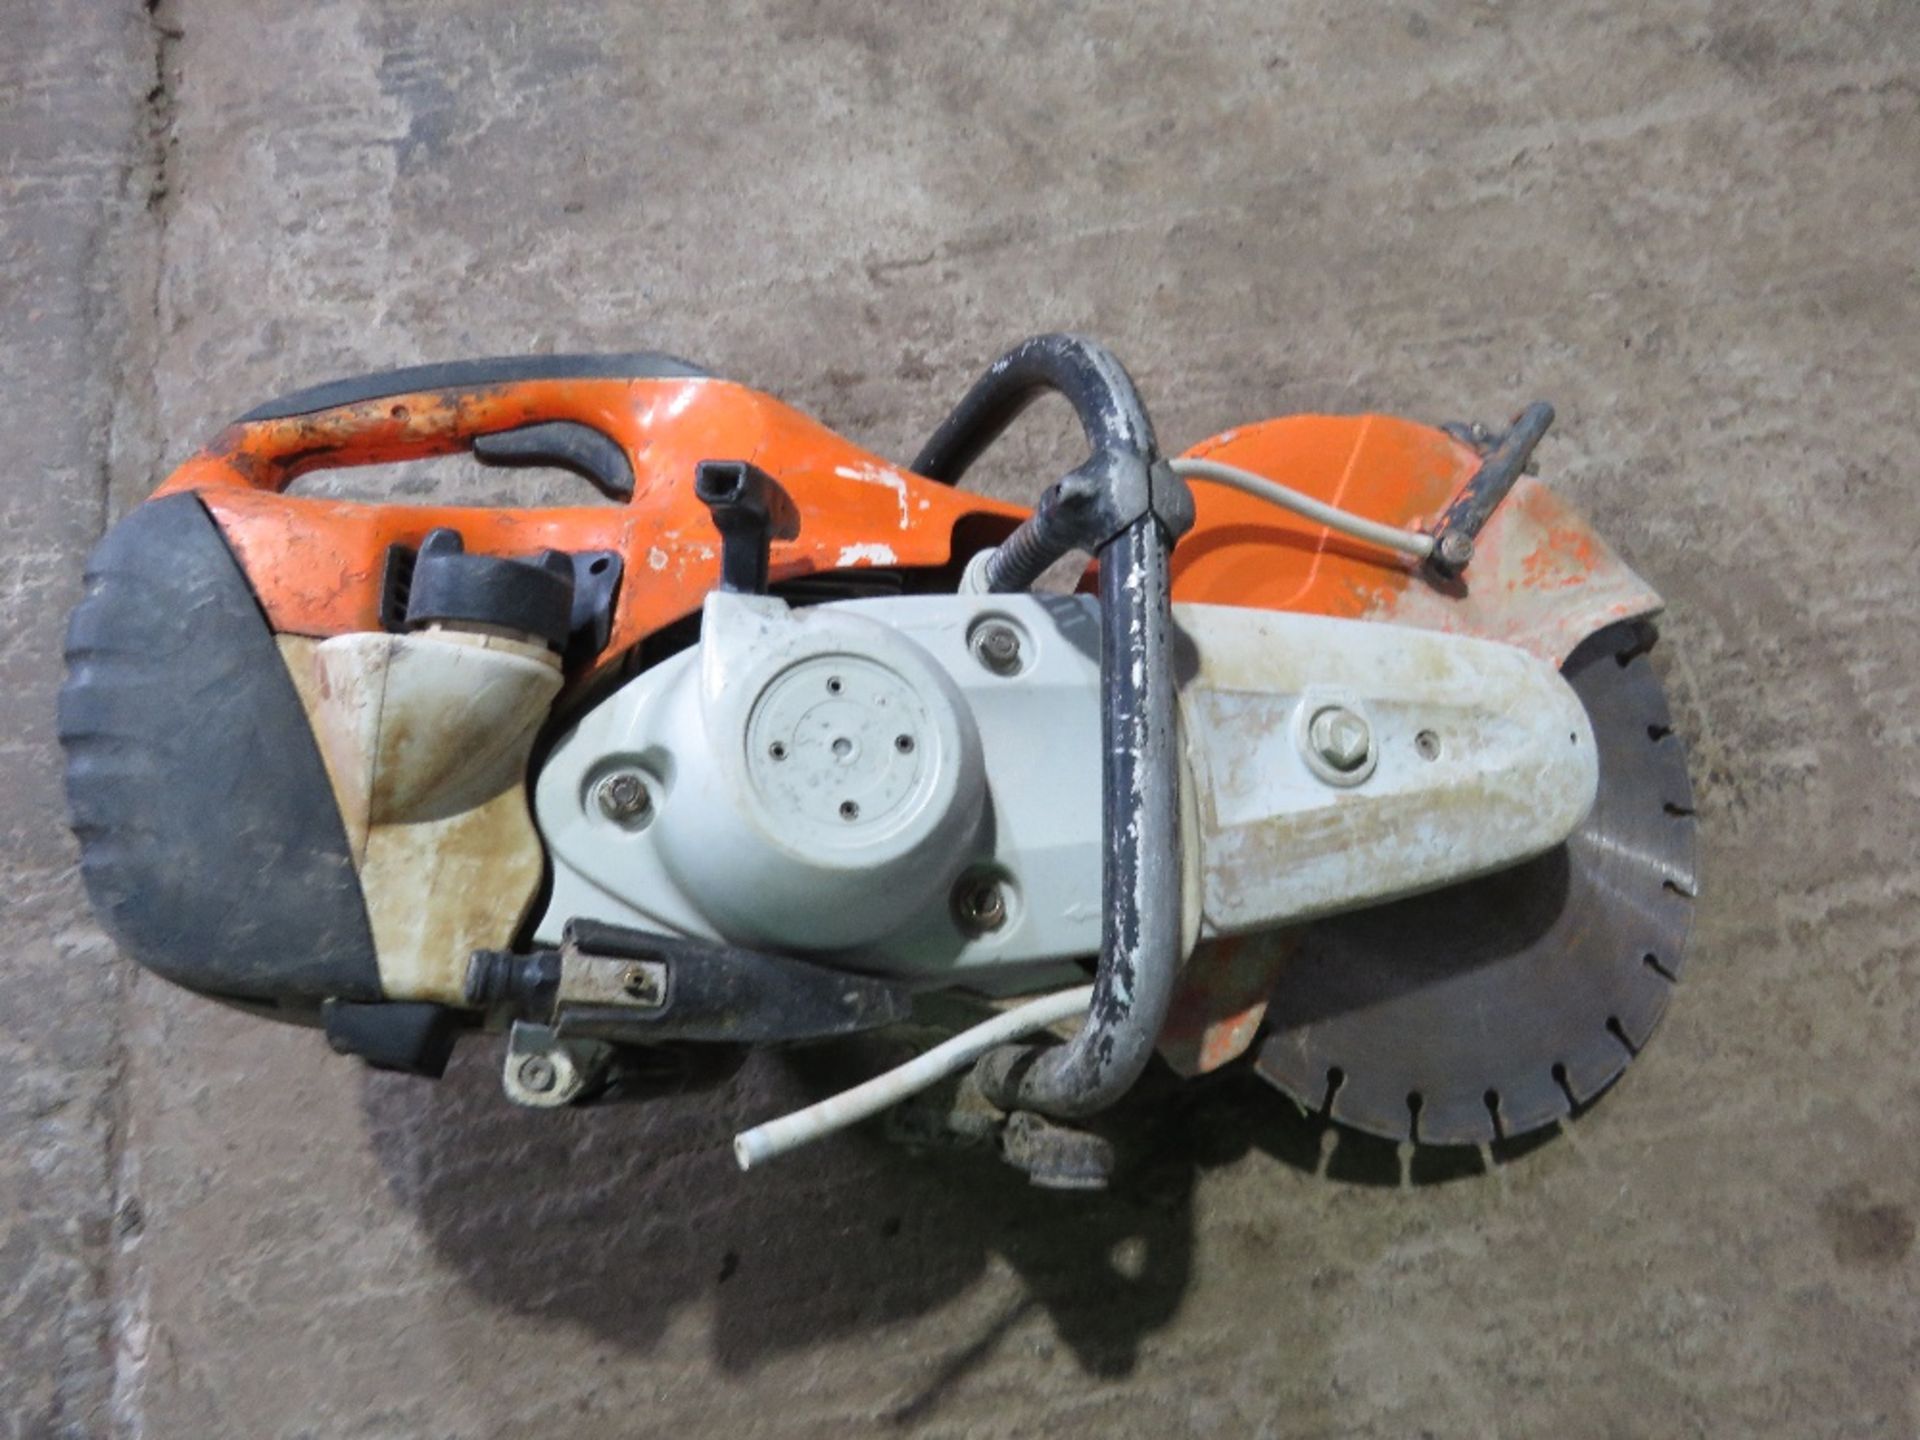 STIHL TS420 PETROL SAW WITH A BLADE FITTED. - Image 3 of 4